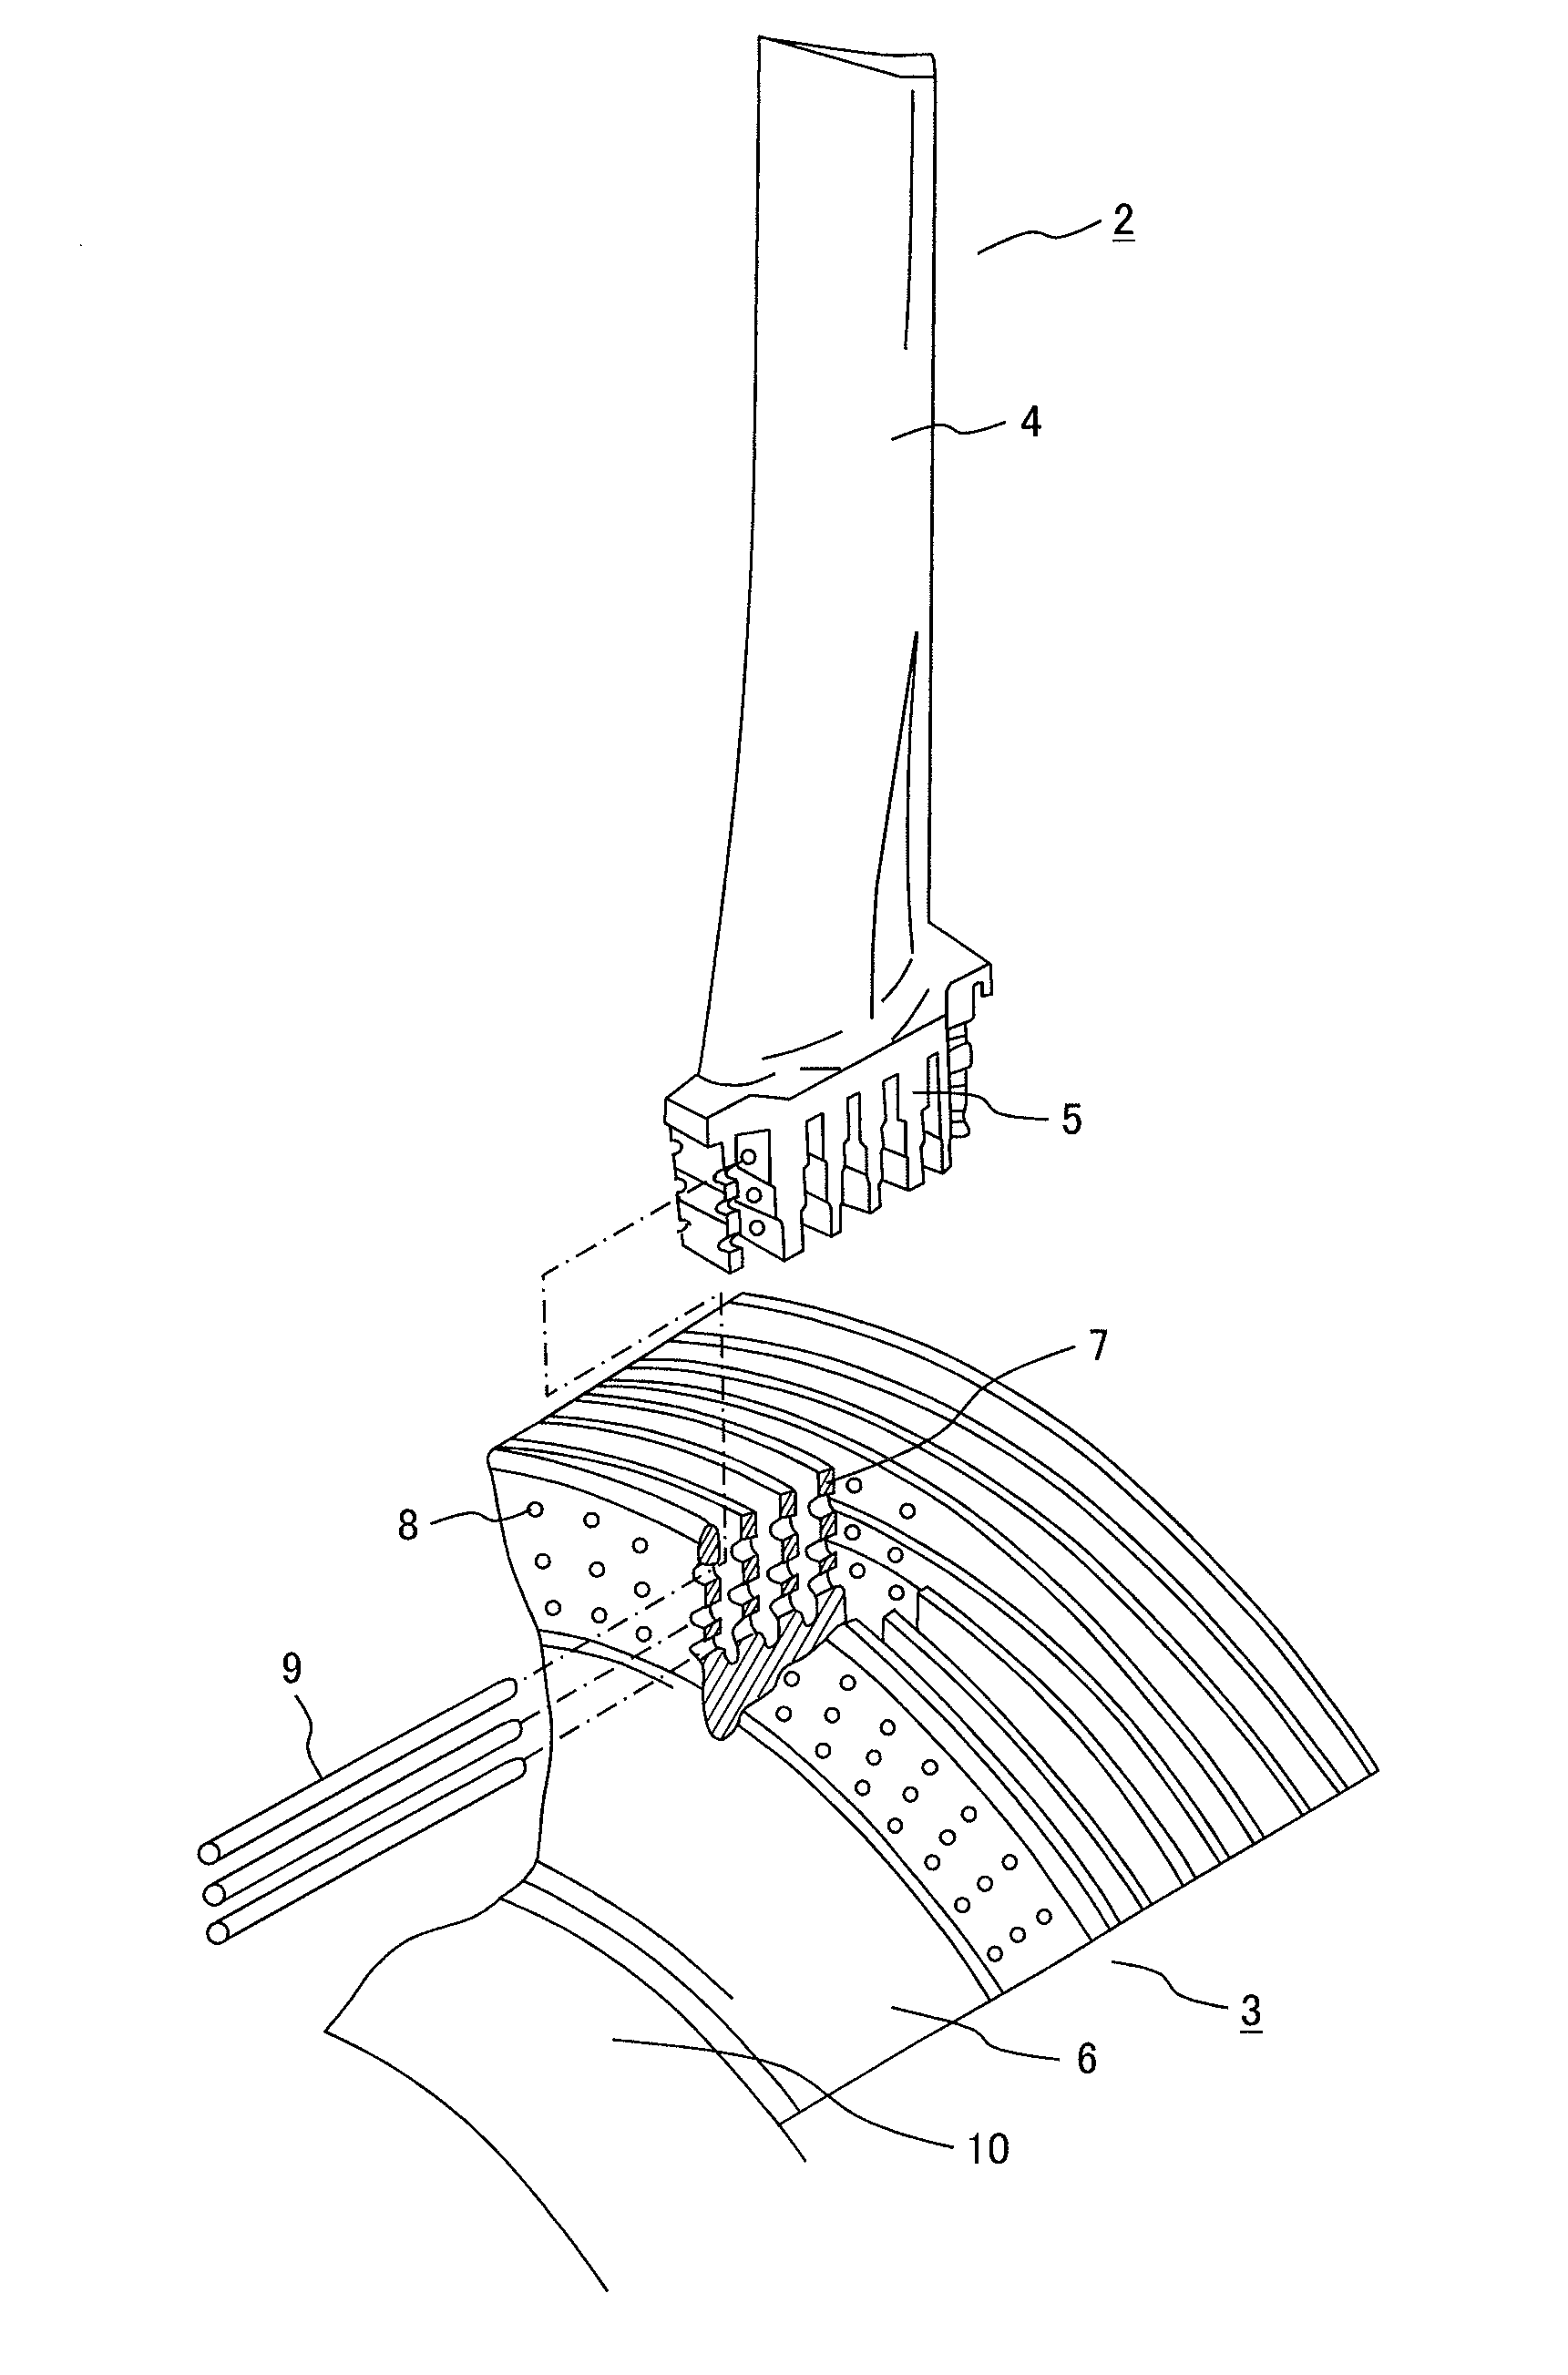 Method for Manufacturing Multi-Finger Pinned Root for Turbine Blade Attached to Turbine Rotor and Turbine Blade